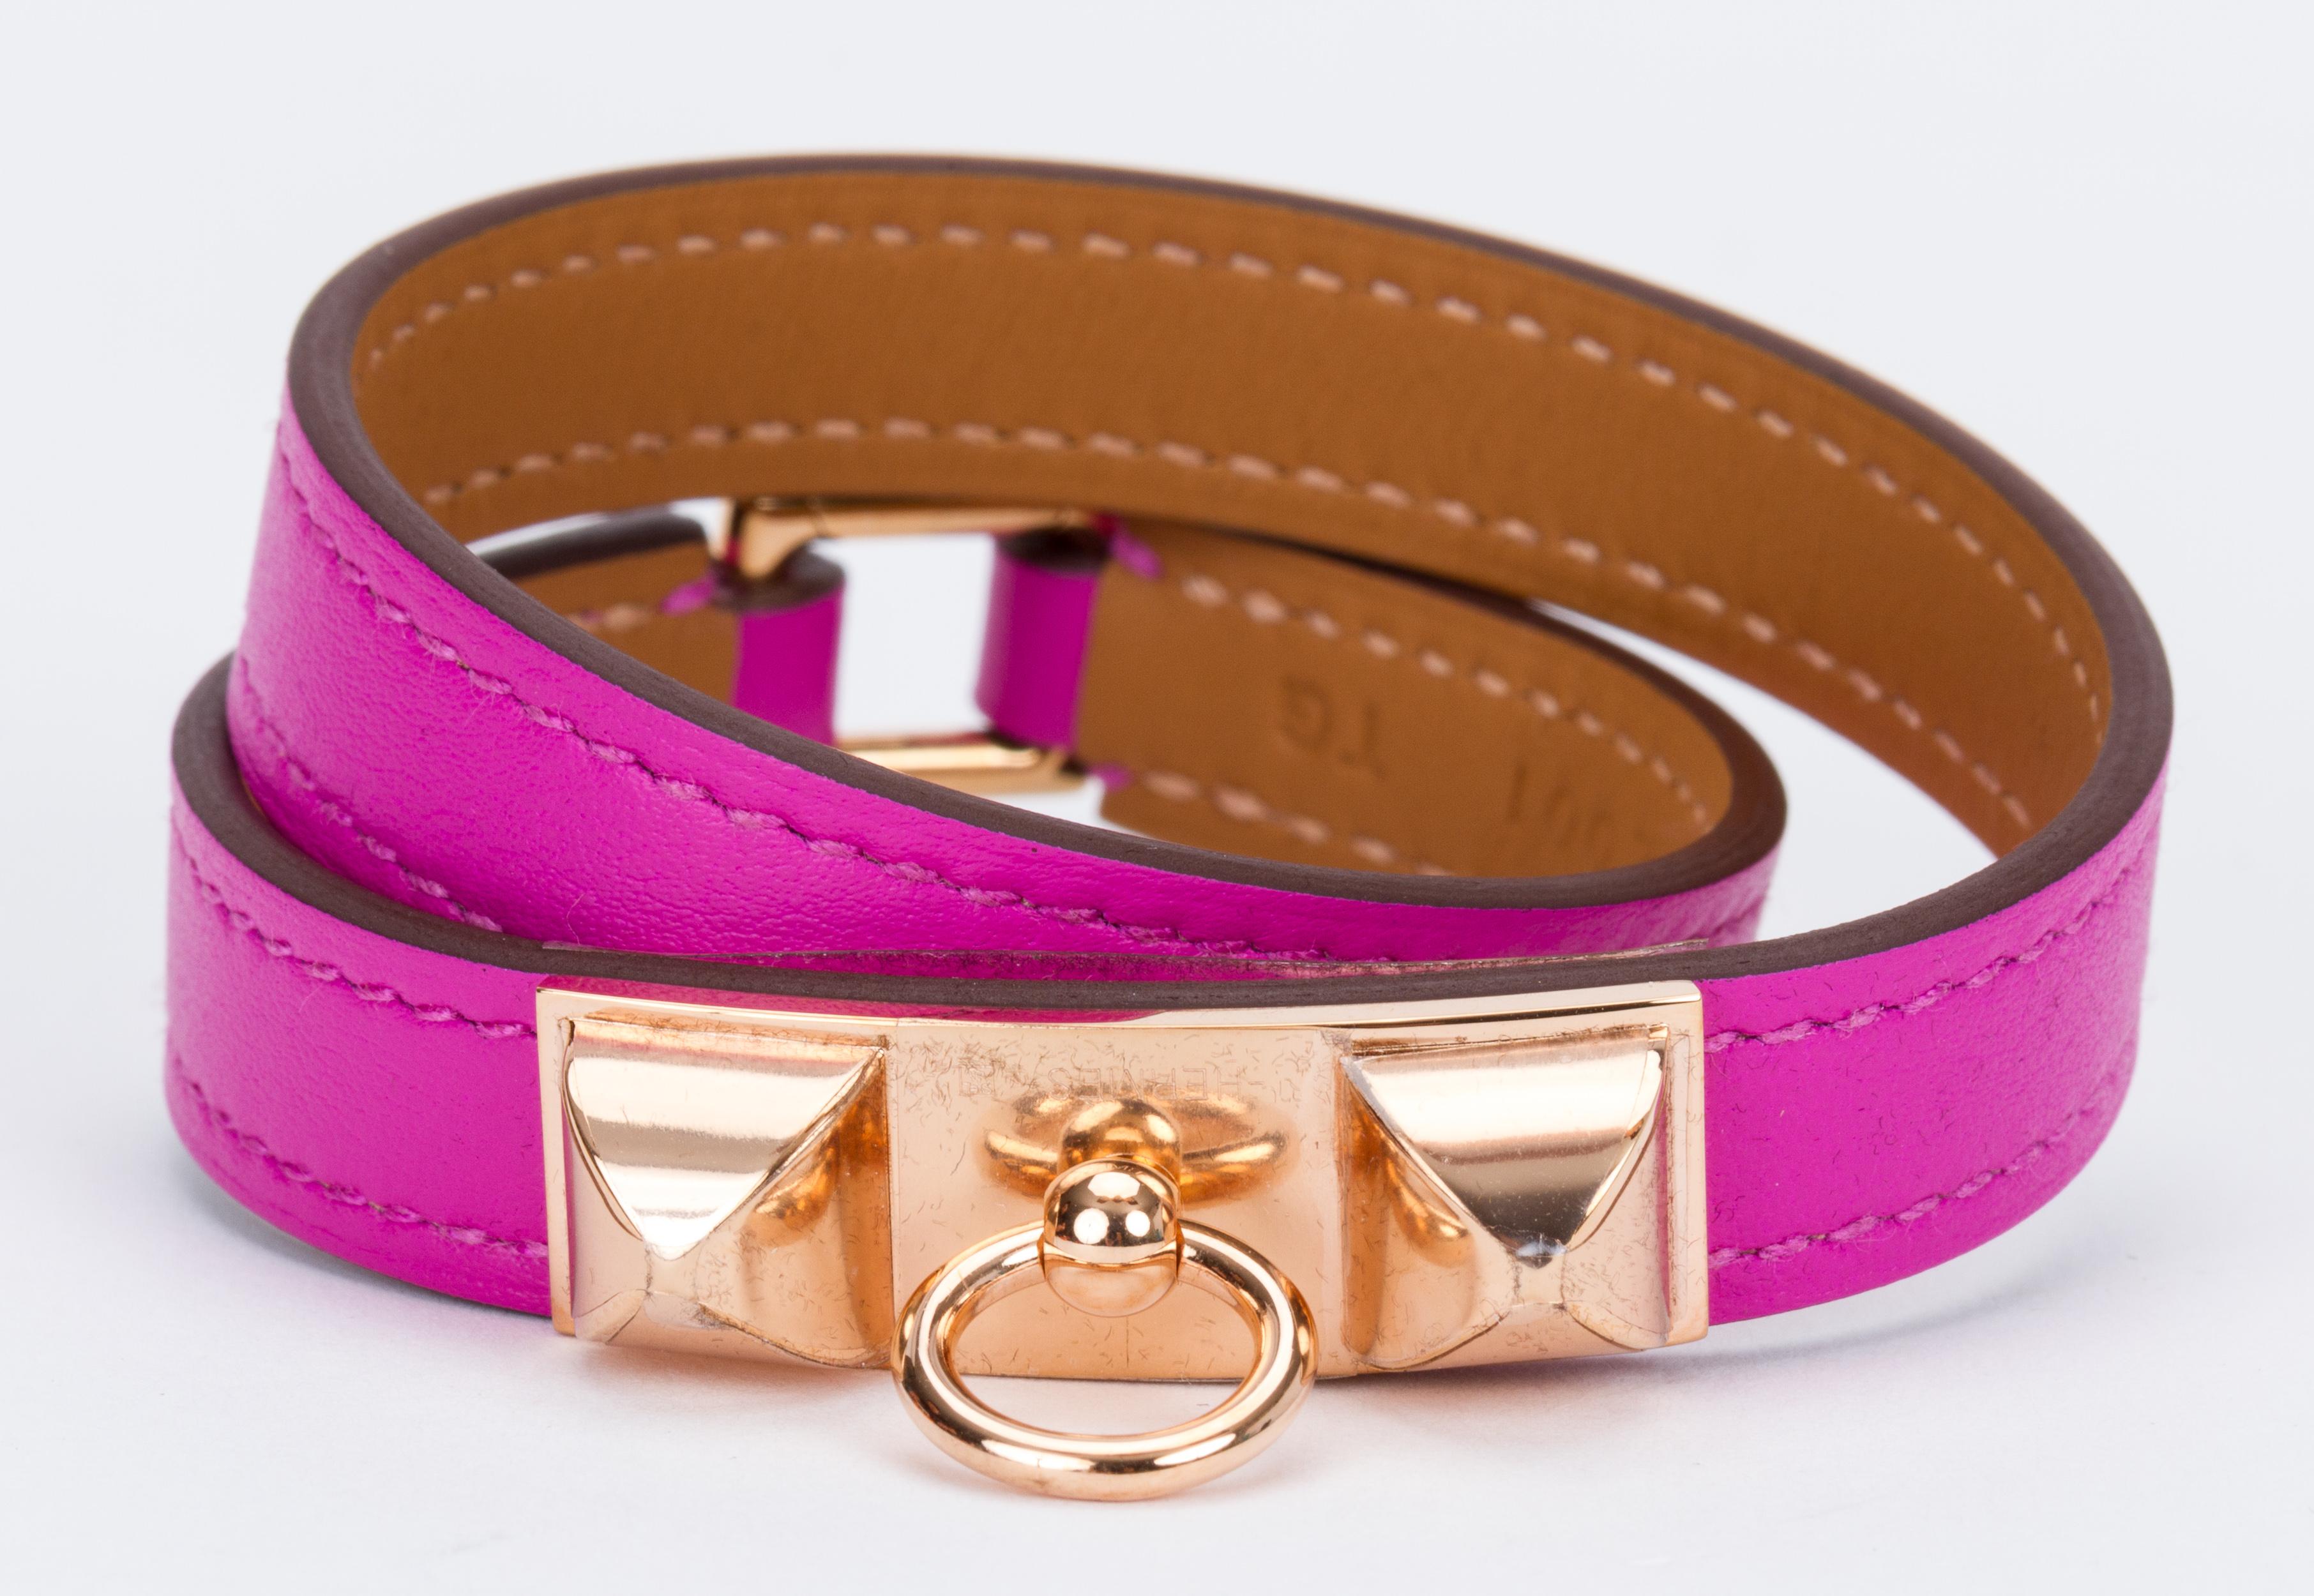 Hermes brand new in box rare pink magnolia and rose gold double wrap bracelet. Date stamp C for 2018. Comes with original box, velvet pouch, ribbon and shopping bag.